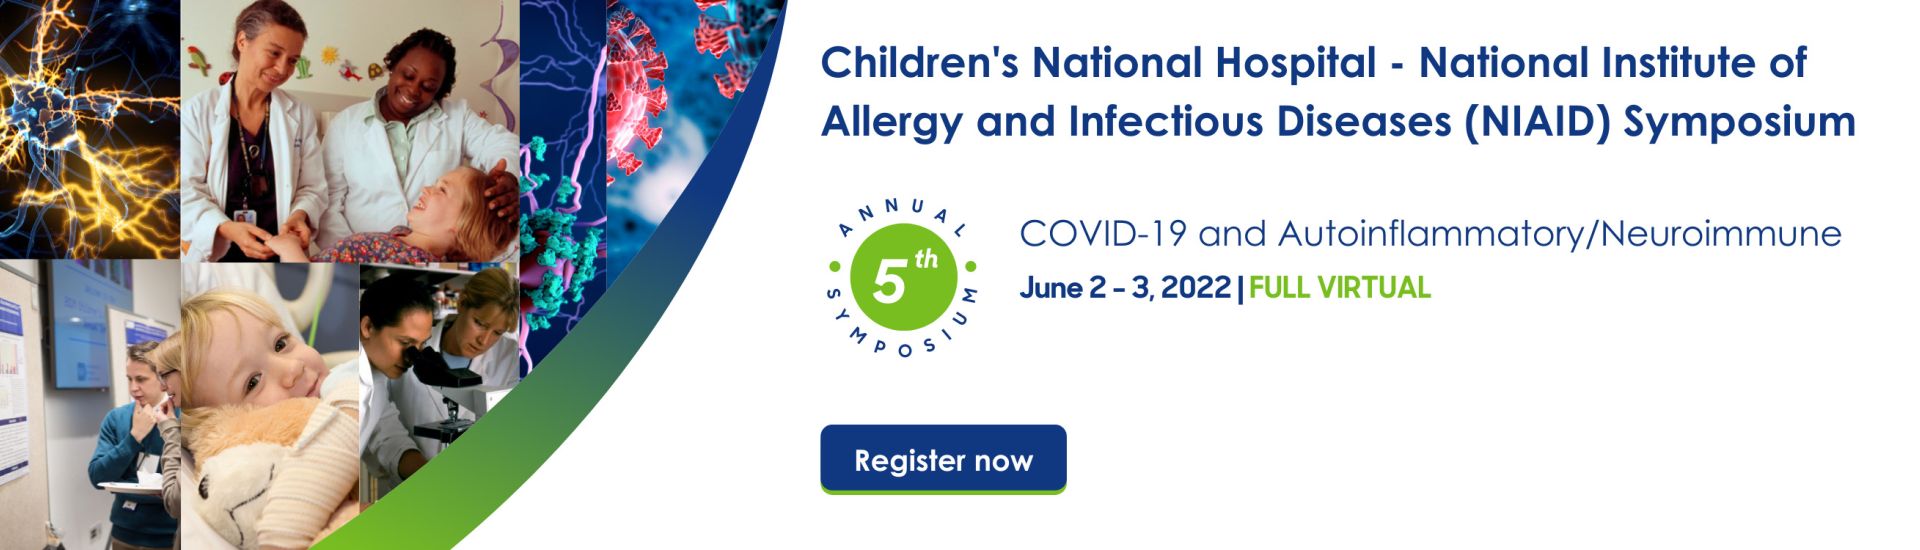 Children's National Hospital - National Institute of Allergy and Infectious Diseases (NIAID) Symposium June 2-3, 2022 full virtual